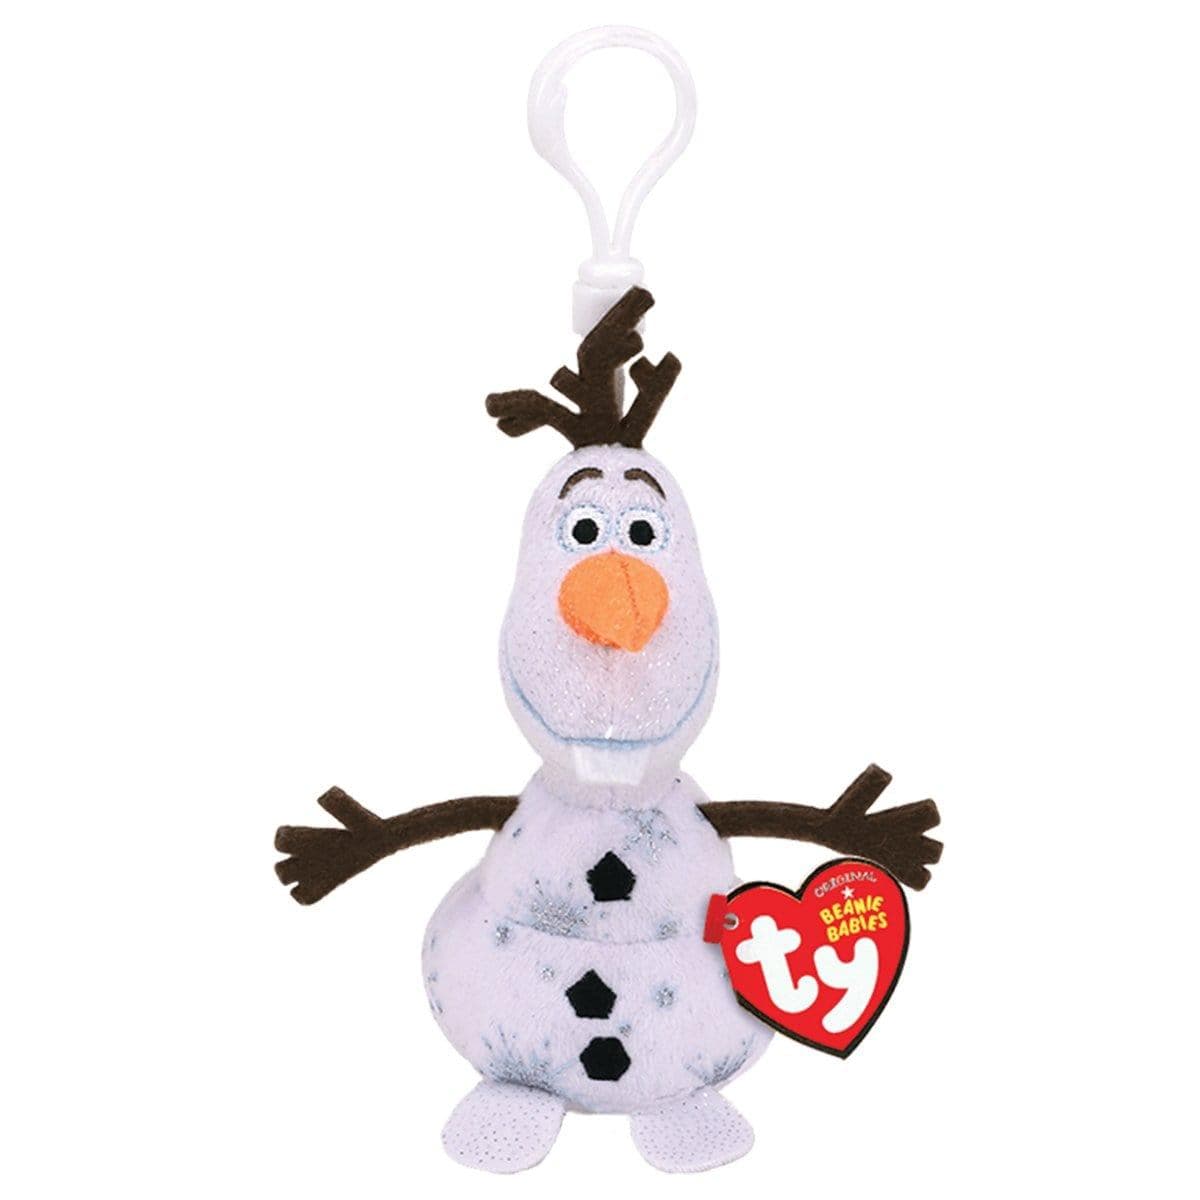 Buy Plushes Frozen 2 - Olaf With Clip sold at Party Expert